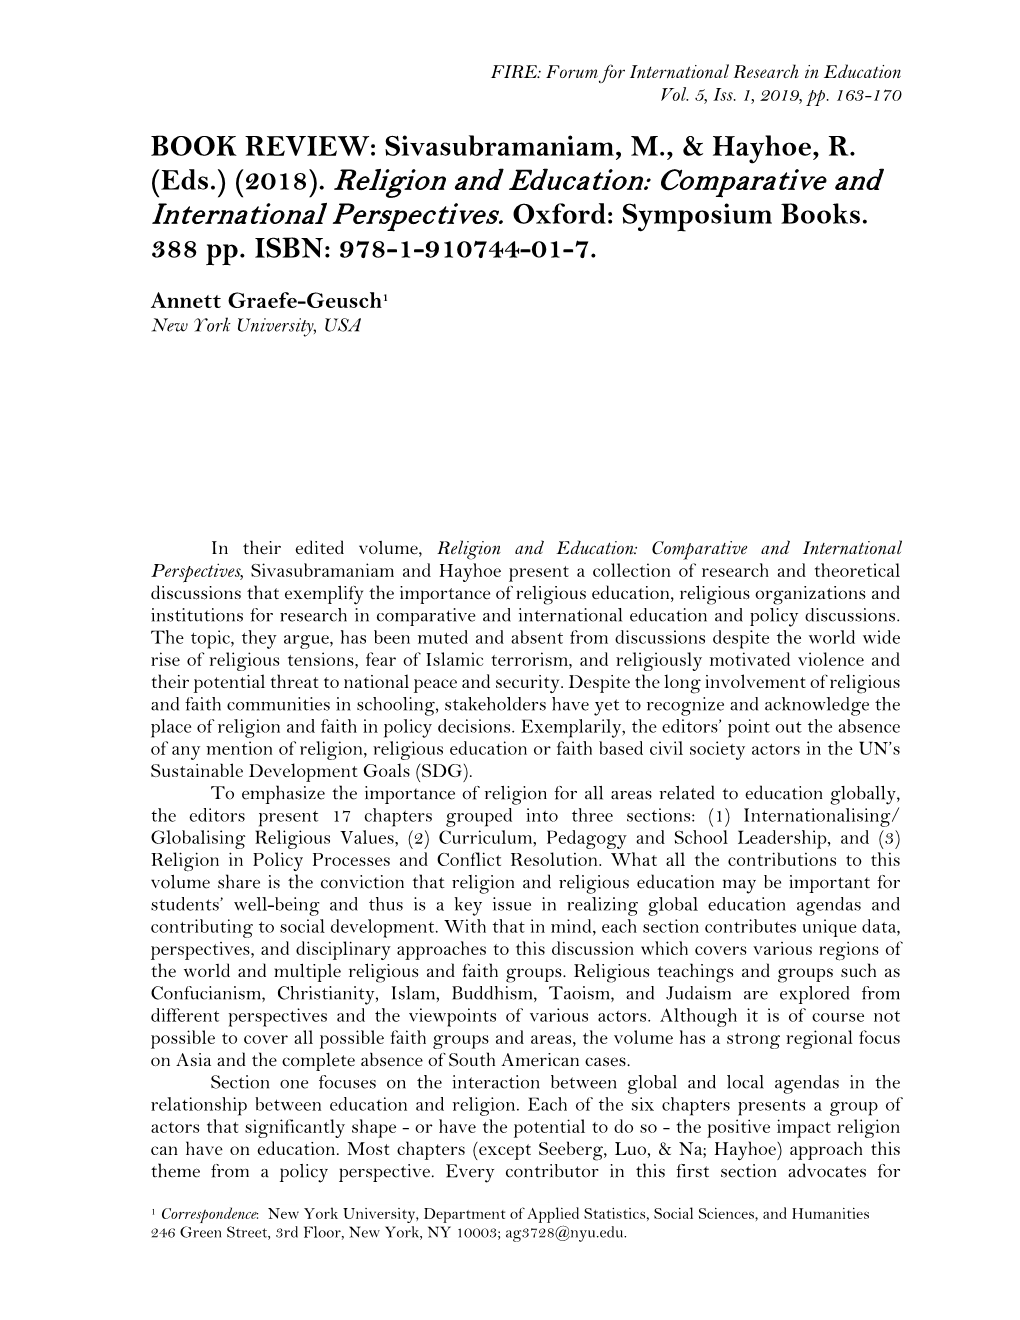 Religion and Education: Comparative and International Perspectives. Oxford: Symposium Books